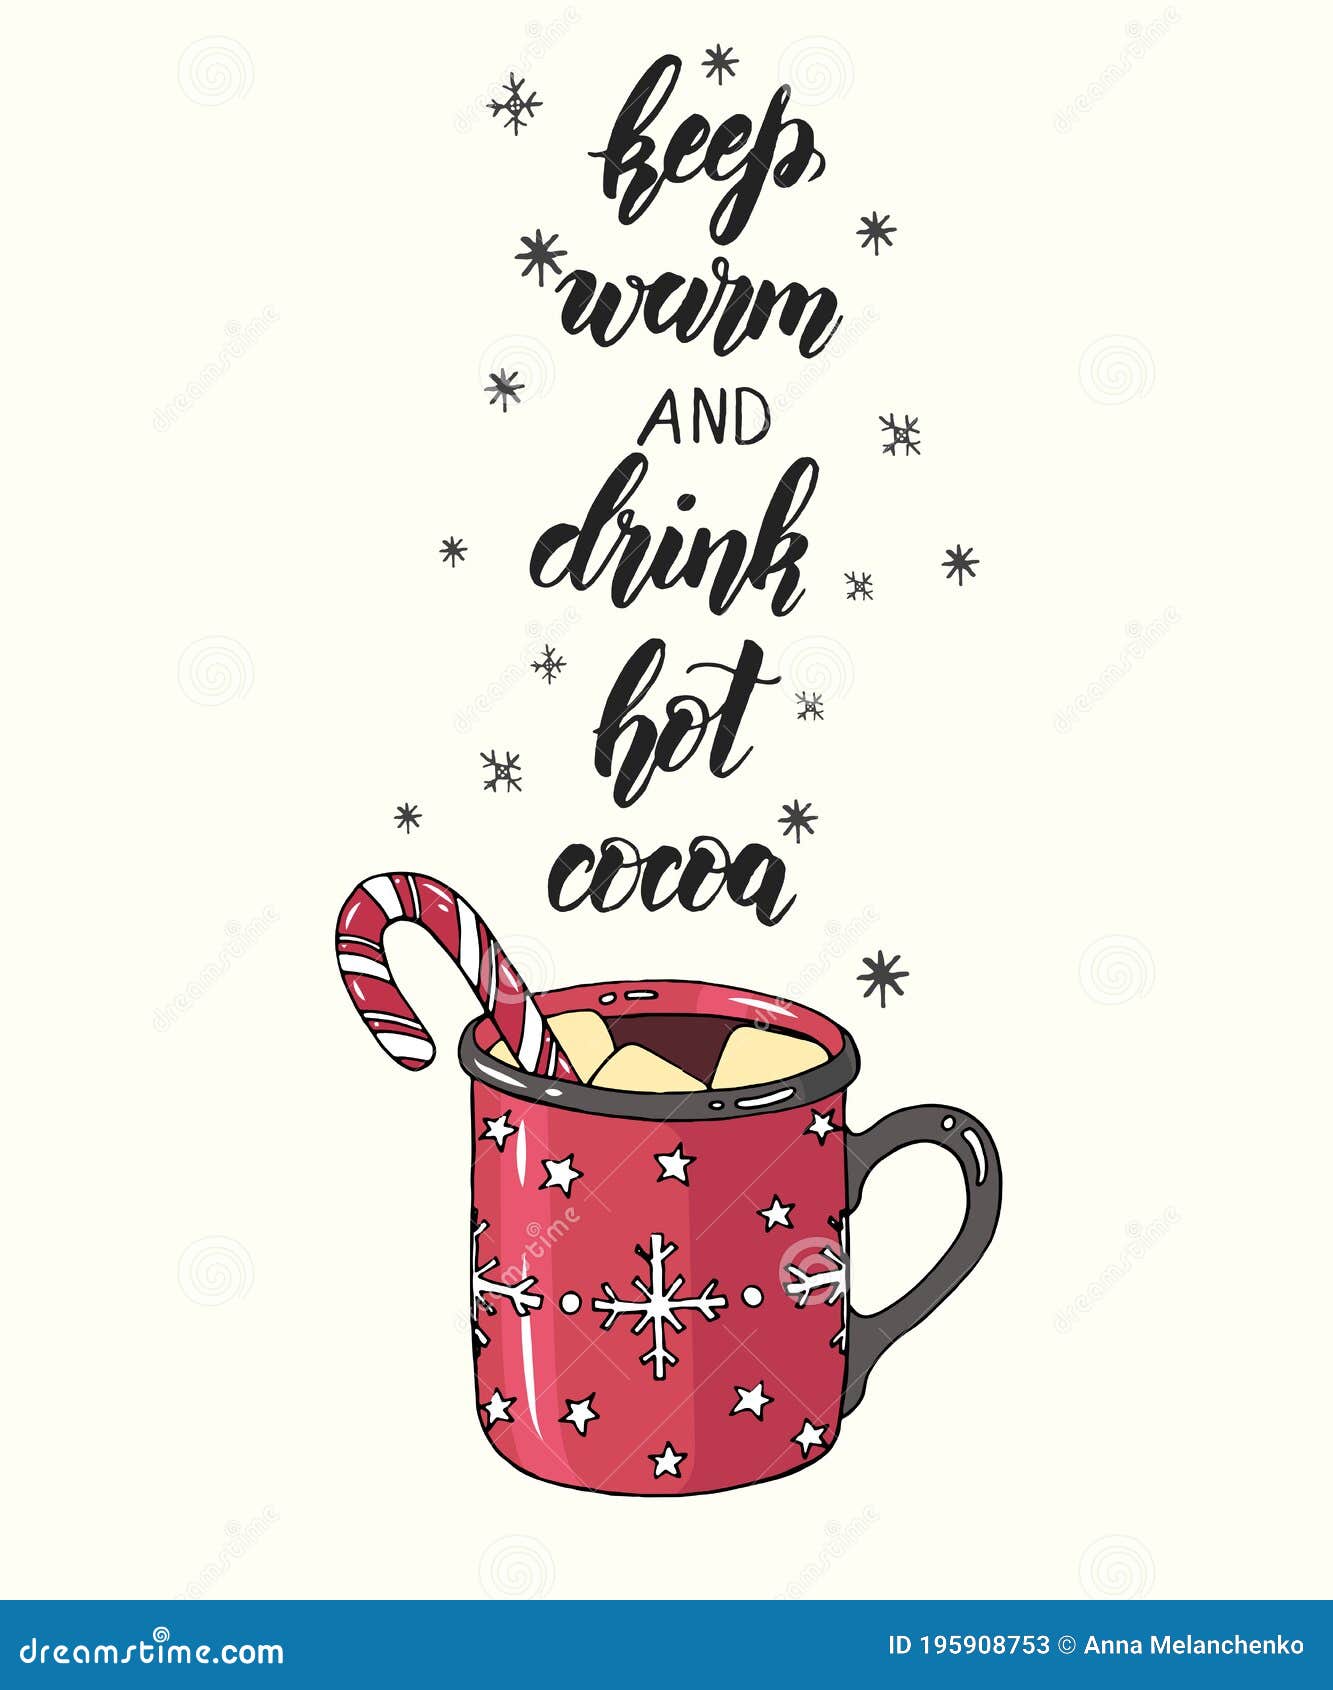 https://thumbs.dreamstime.com/z/keep-warm-drink-hot-cocoa-lettering-calligraphy-phrase-hand-made-motivation-quote-drawn-colored-cup-chocolate-195908753.jpg